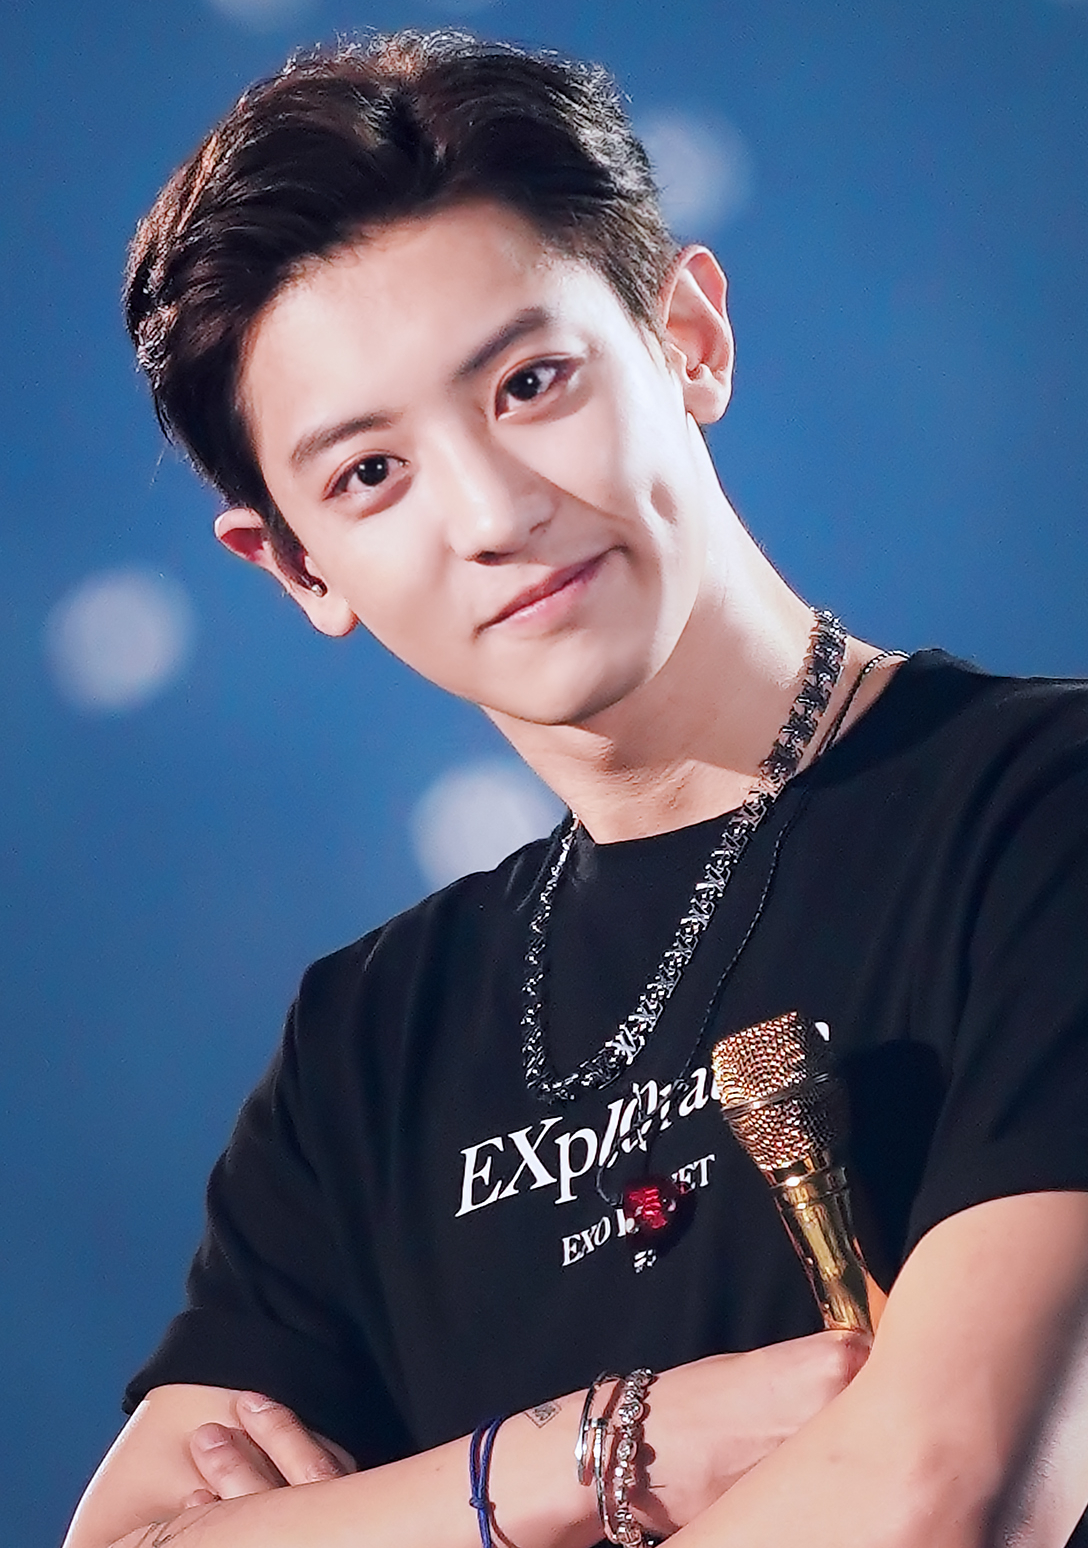 Are you Big Fan of Chanyeol? Take this quiz!! thumbnail